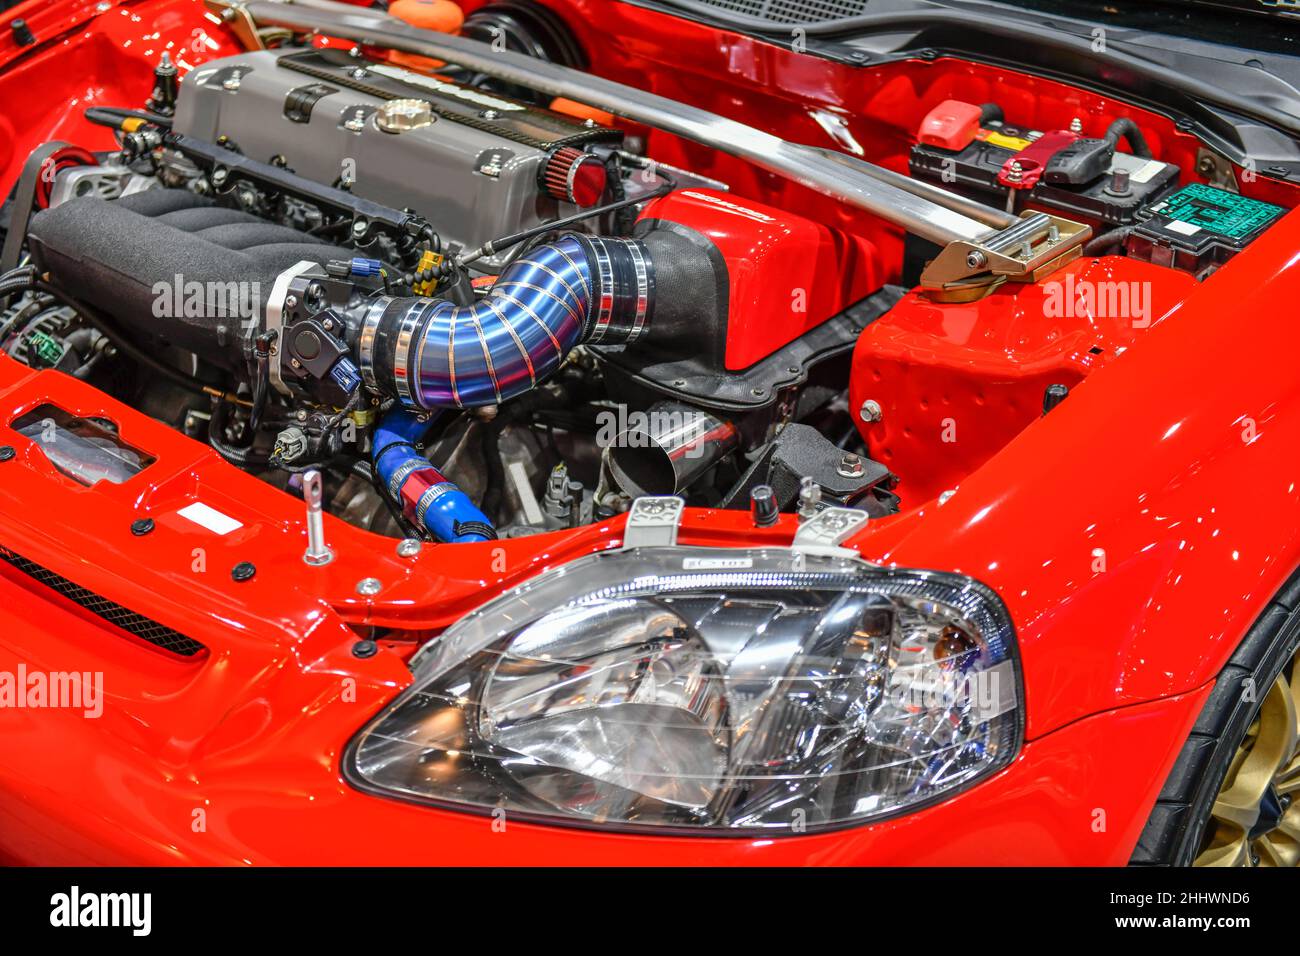 Details of red car engine. Modification of the turbo engine Stock Photo